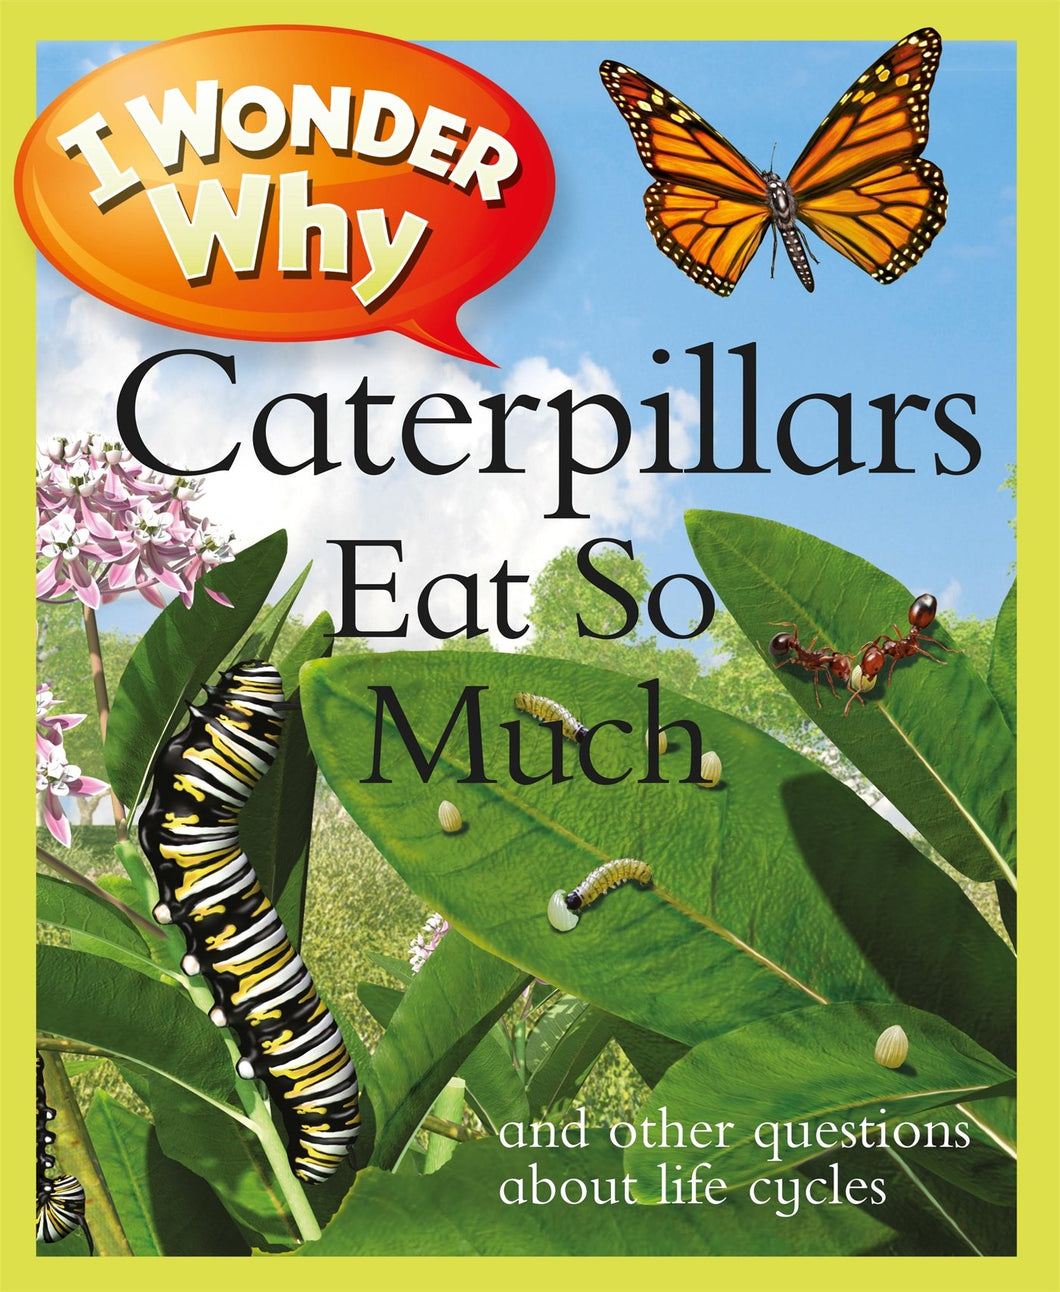 I Wonder Why: Caterpillars Eat So Much and other questions about life cycles